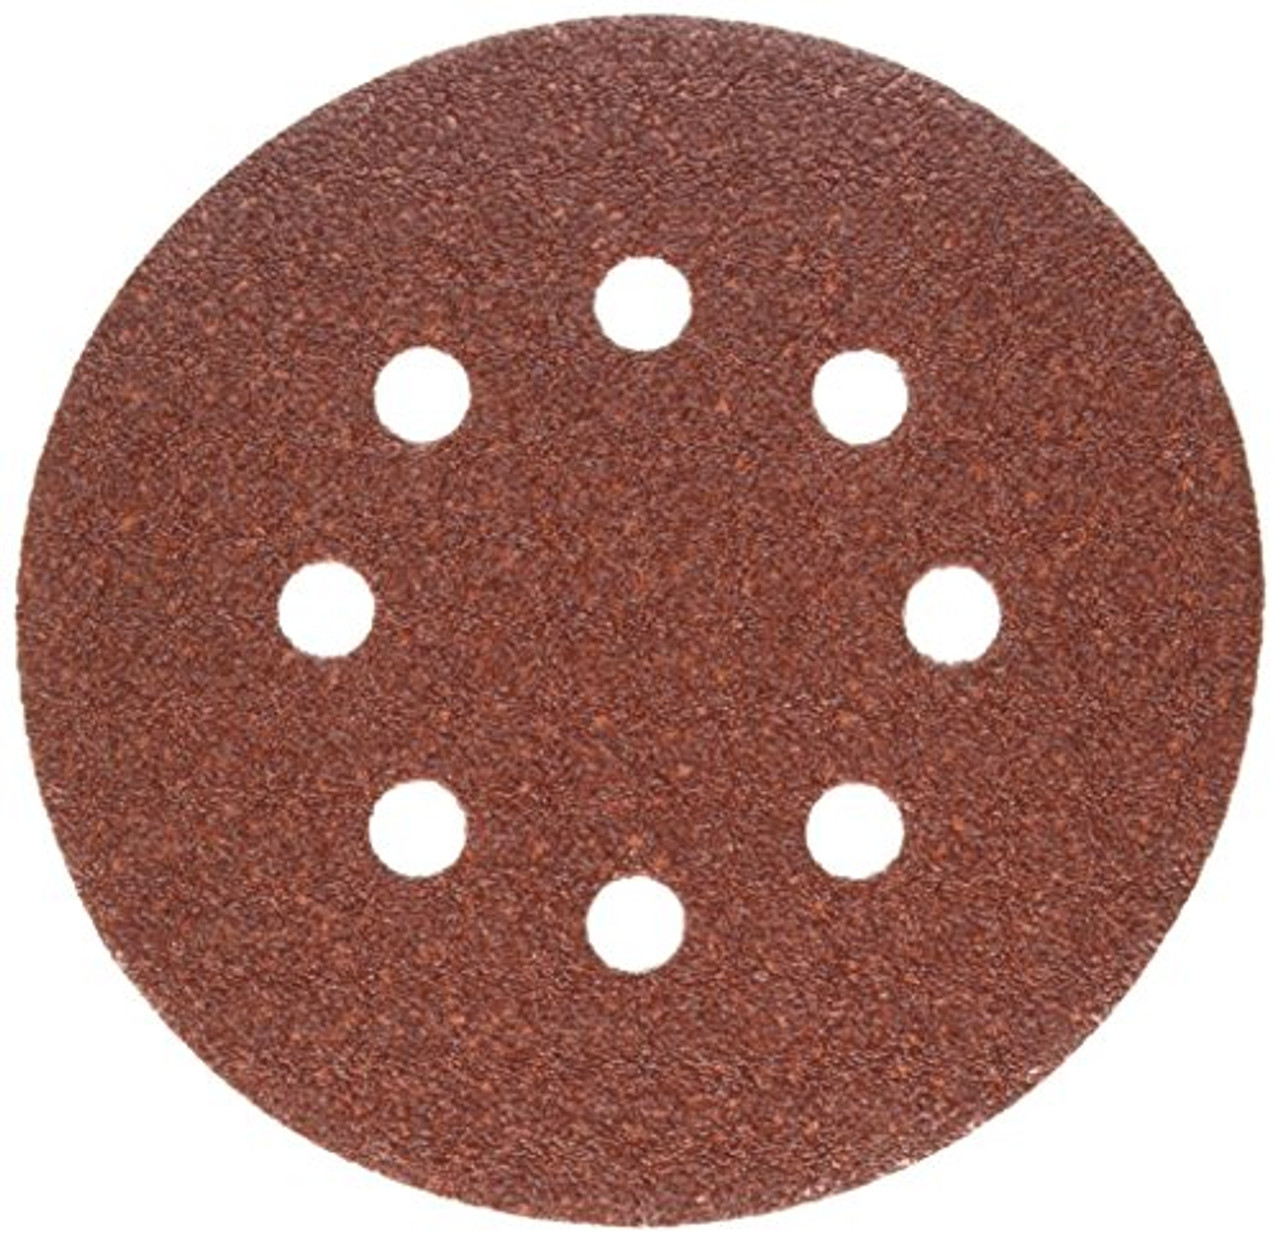 PORTER-CABLE 725800625 5-Inch 8 Hole 60G Disc (25-Pack)